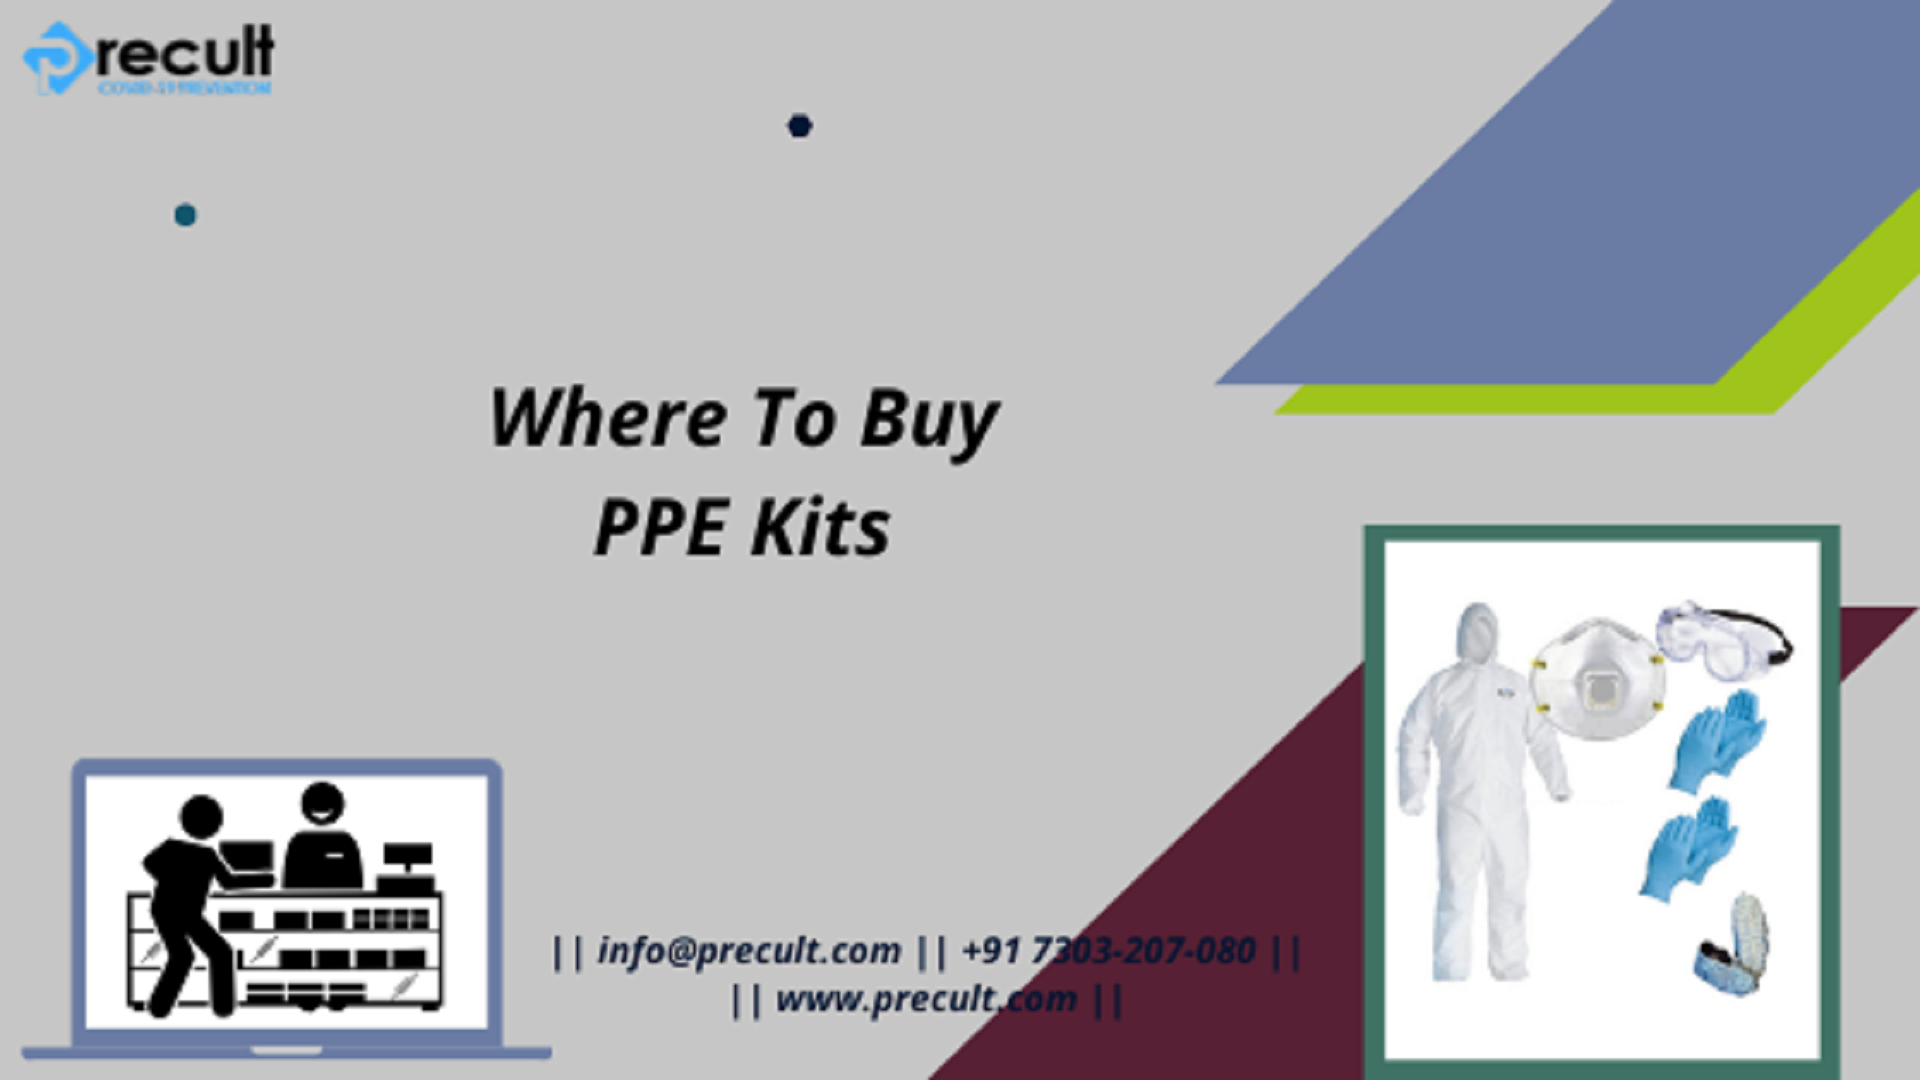 Where to Buy PPE Kits - Precult